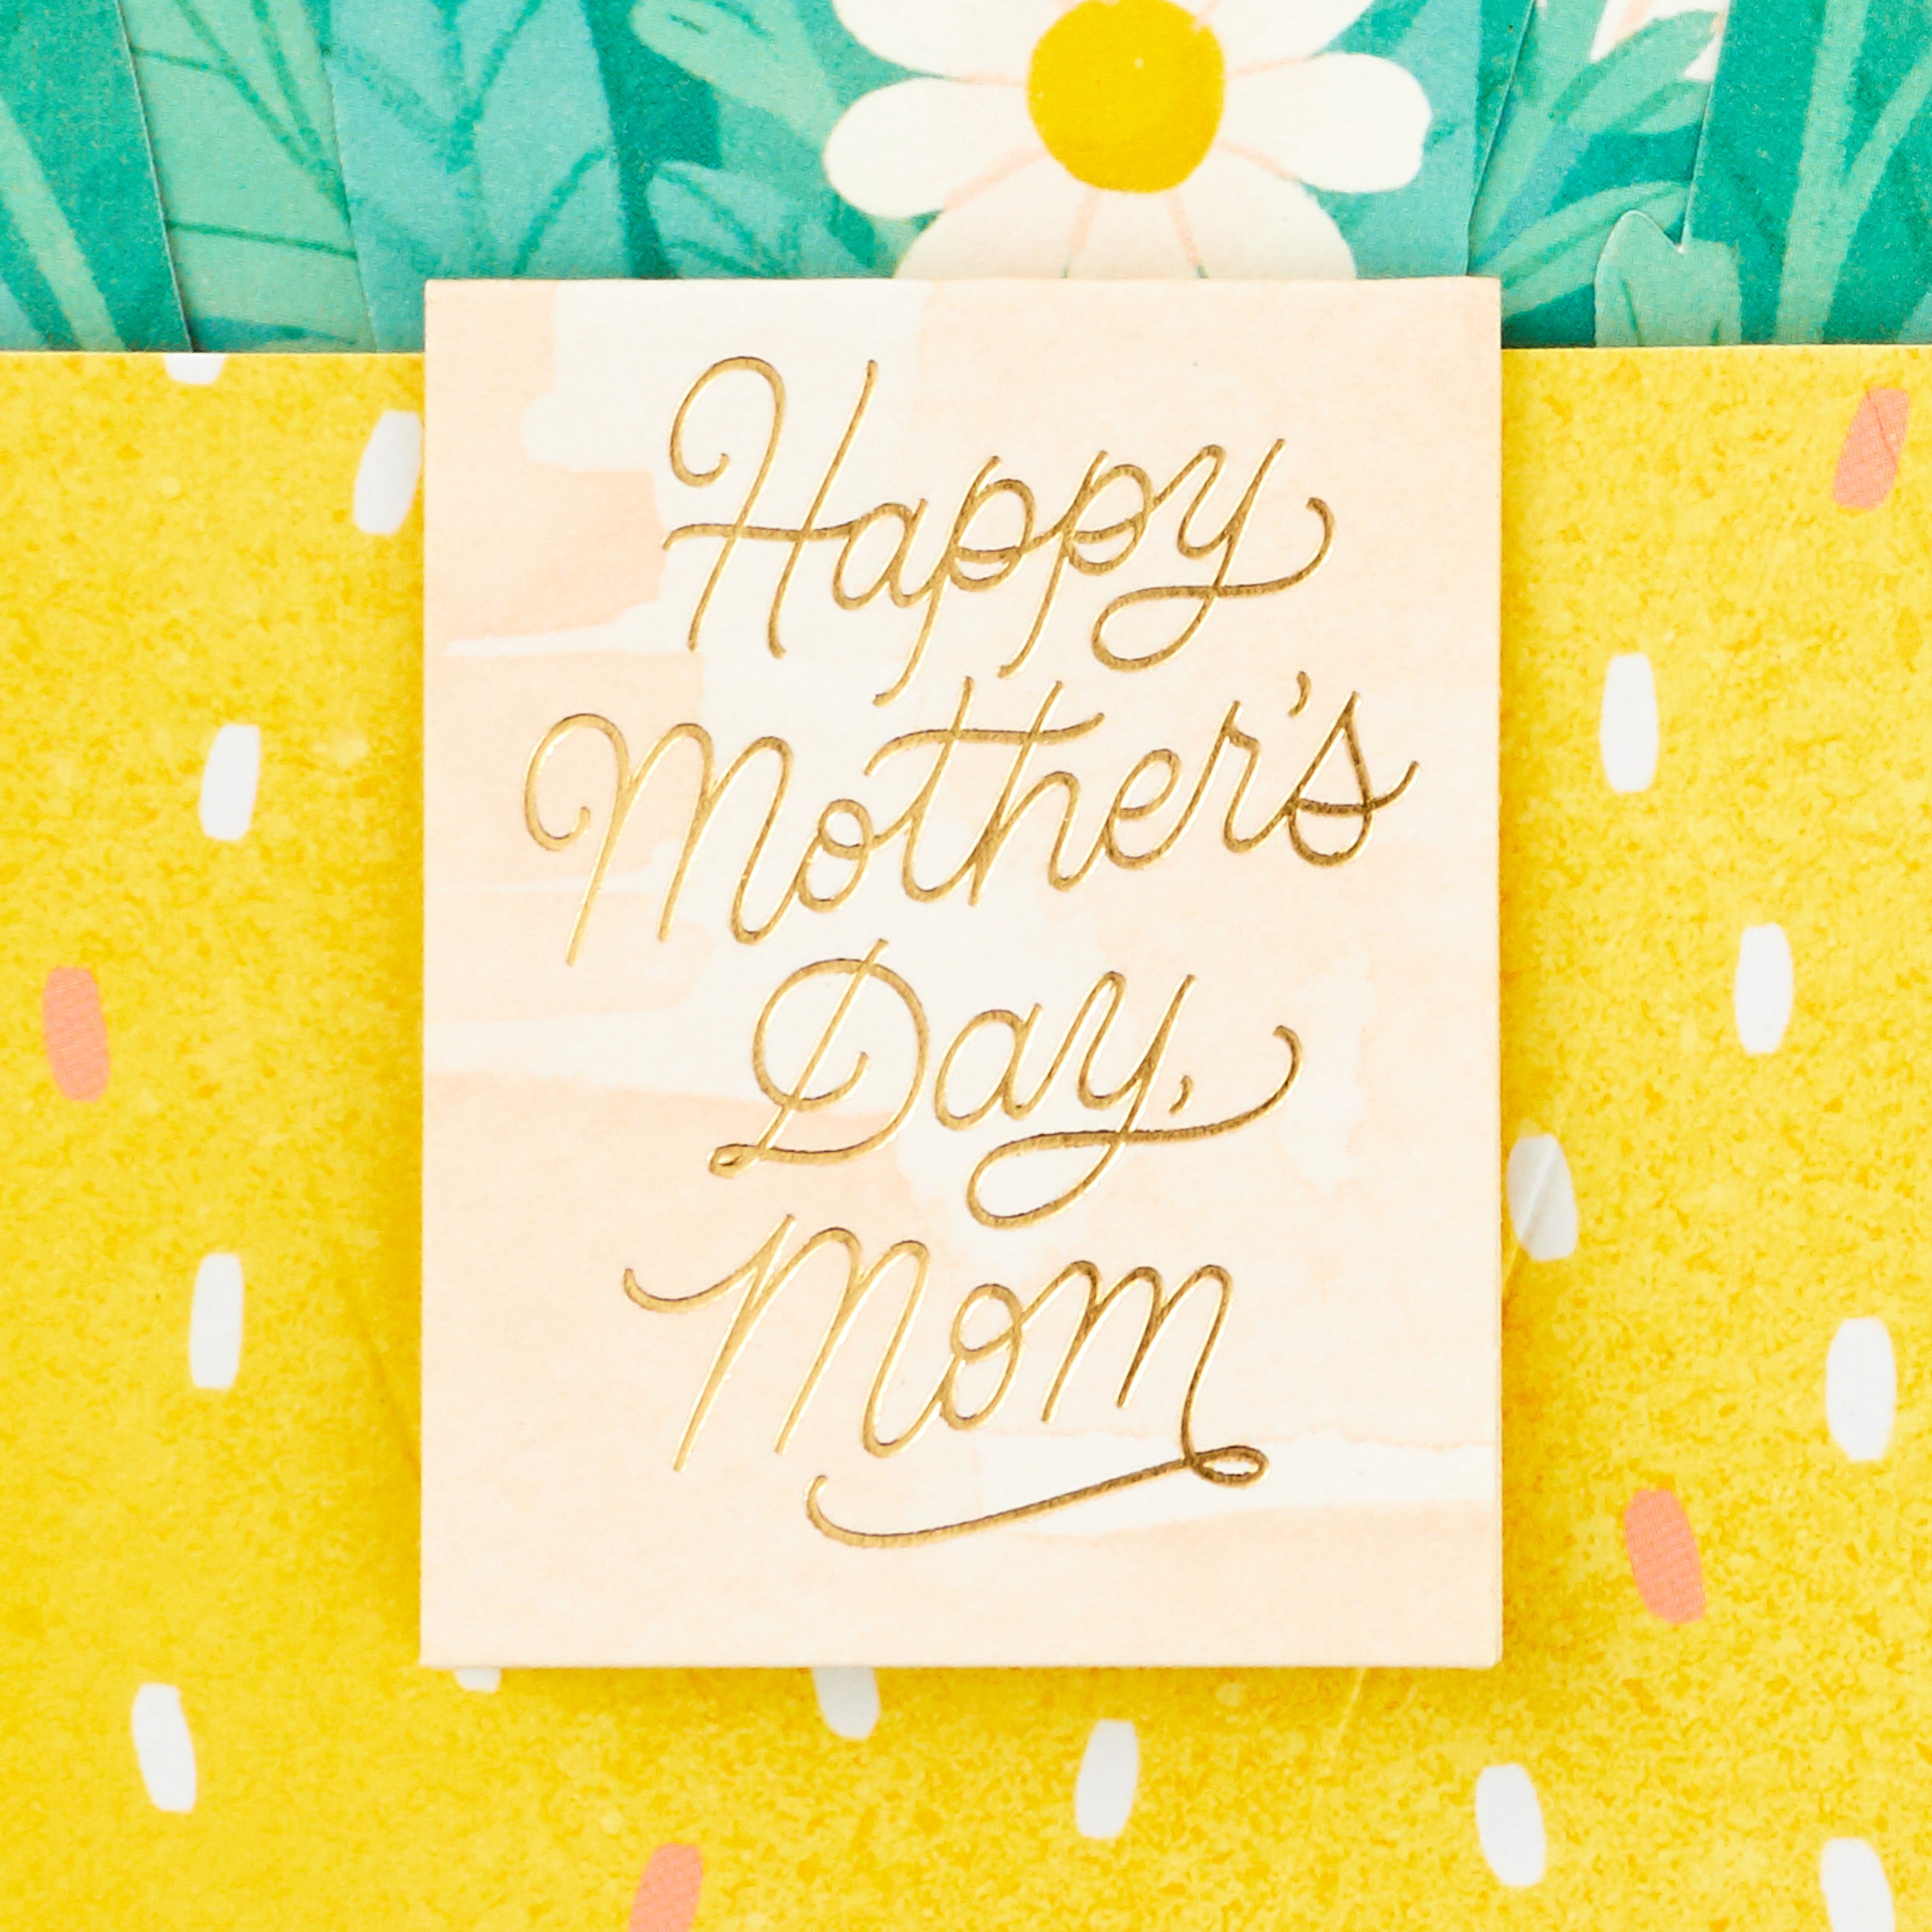 Paper Wonder Displayable Pop Up Mothers Day Card for Mom (Daisy Bouquet)